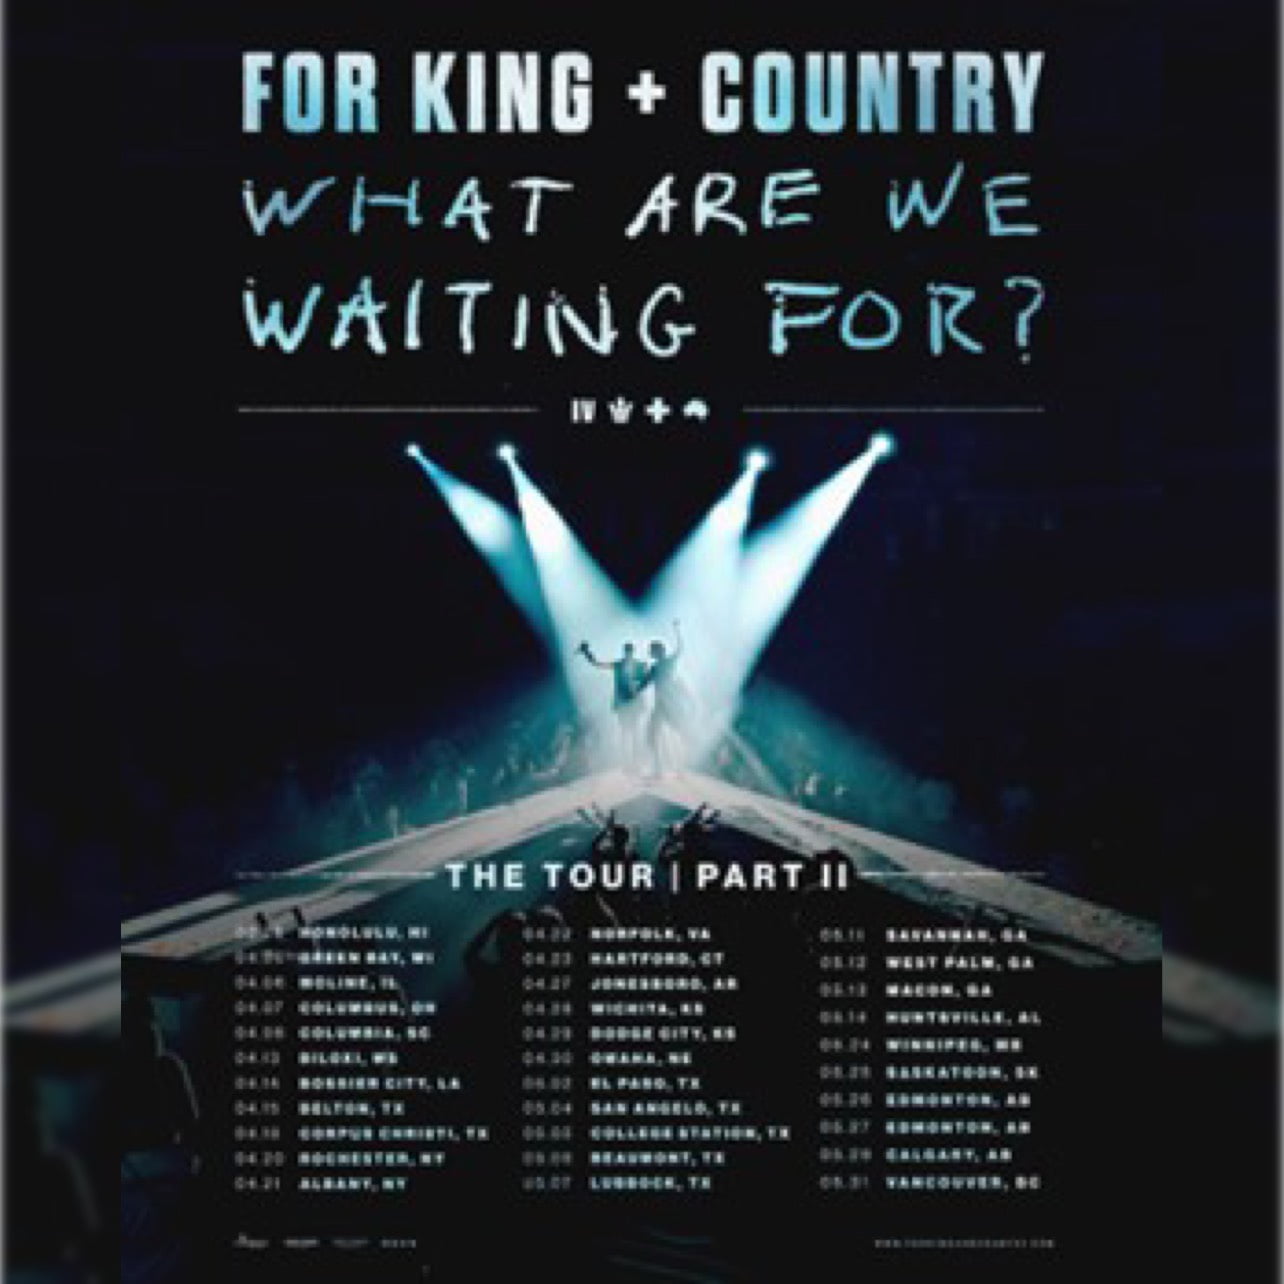 FOR KING + COUNTRY - "WHAT ARE WE WAITING FOR?" TOUR via 360 MAGAZINE